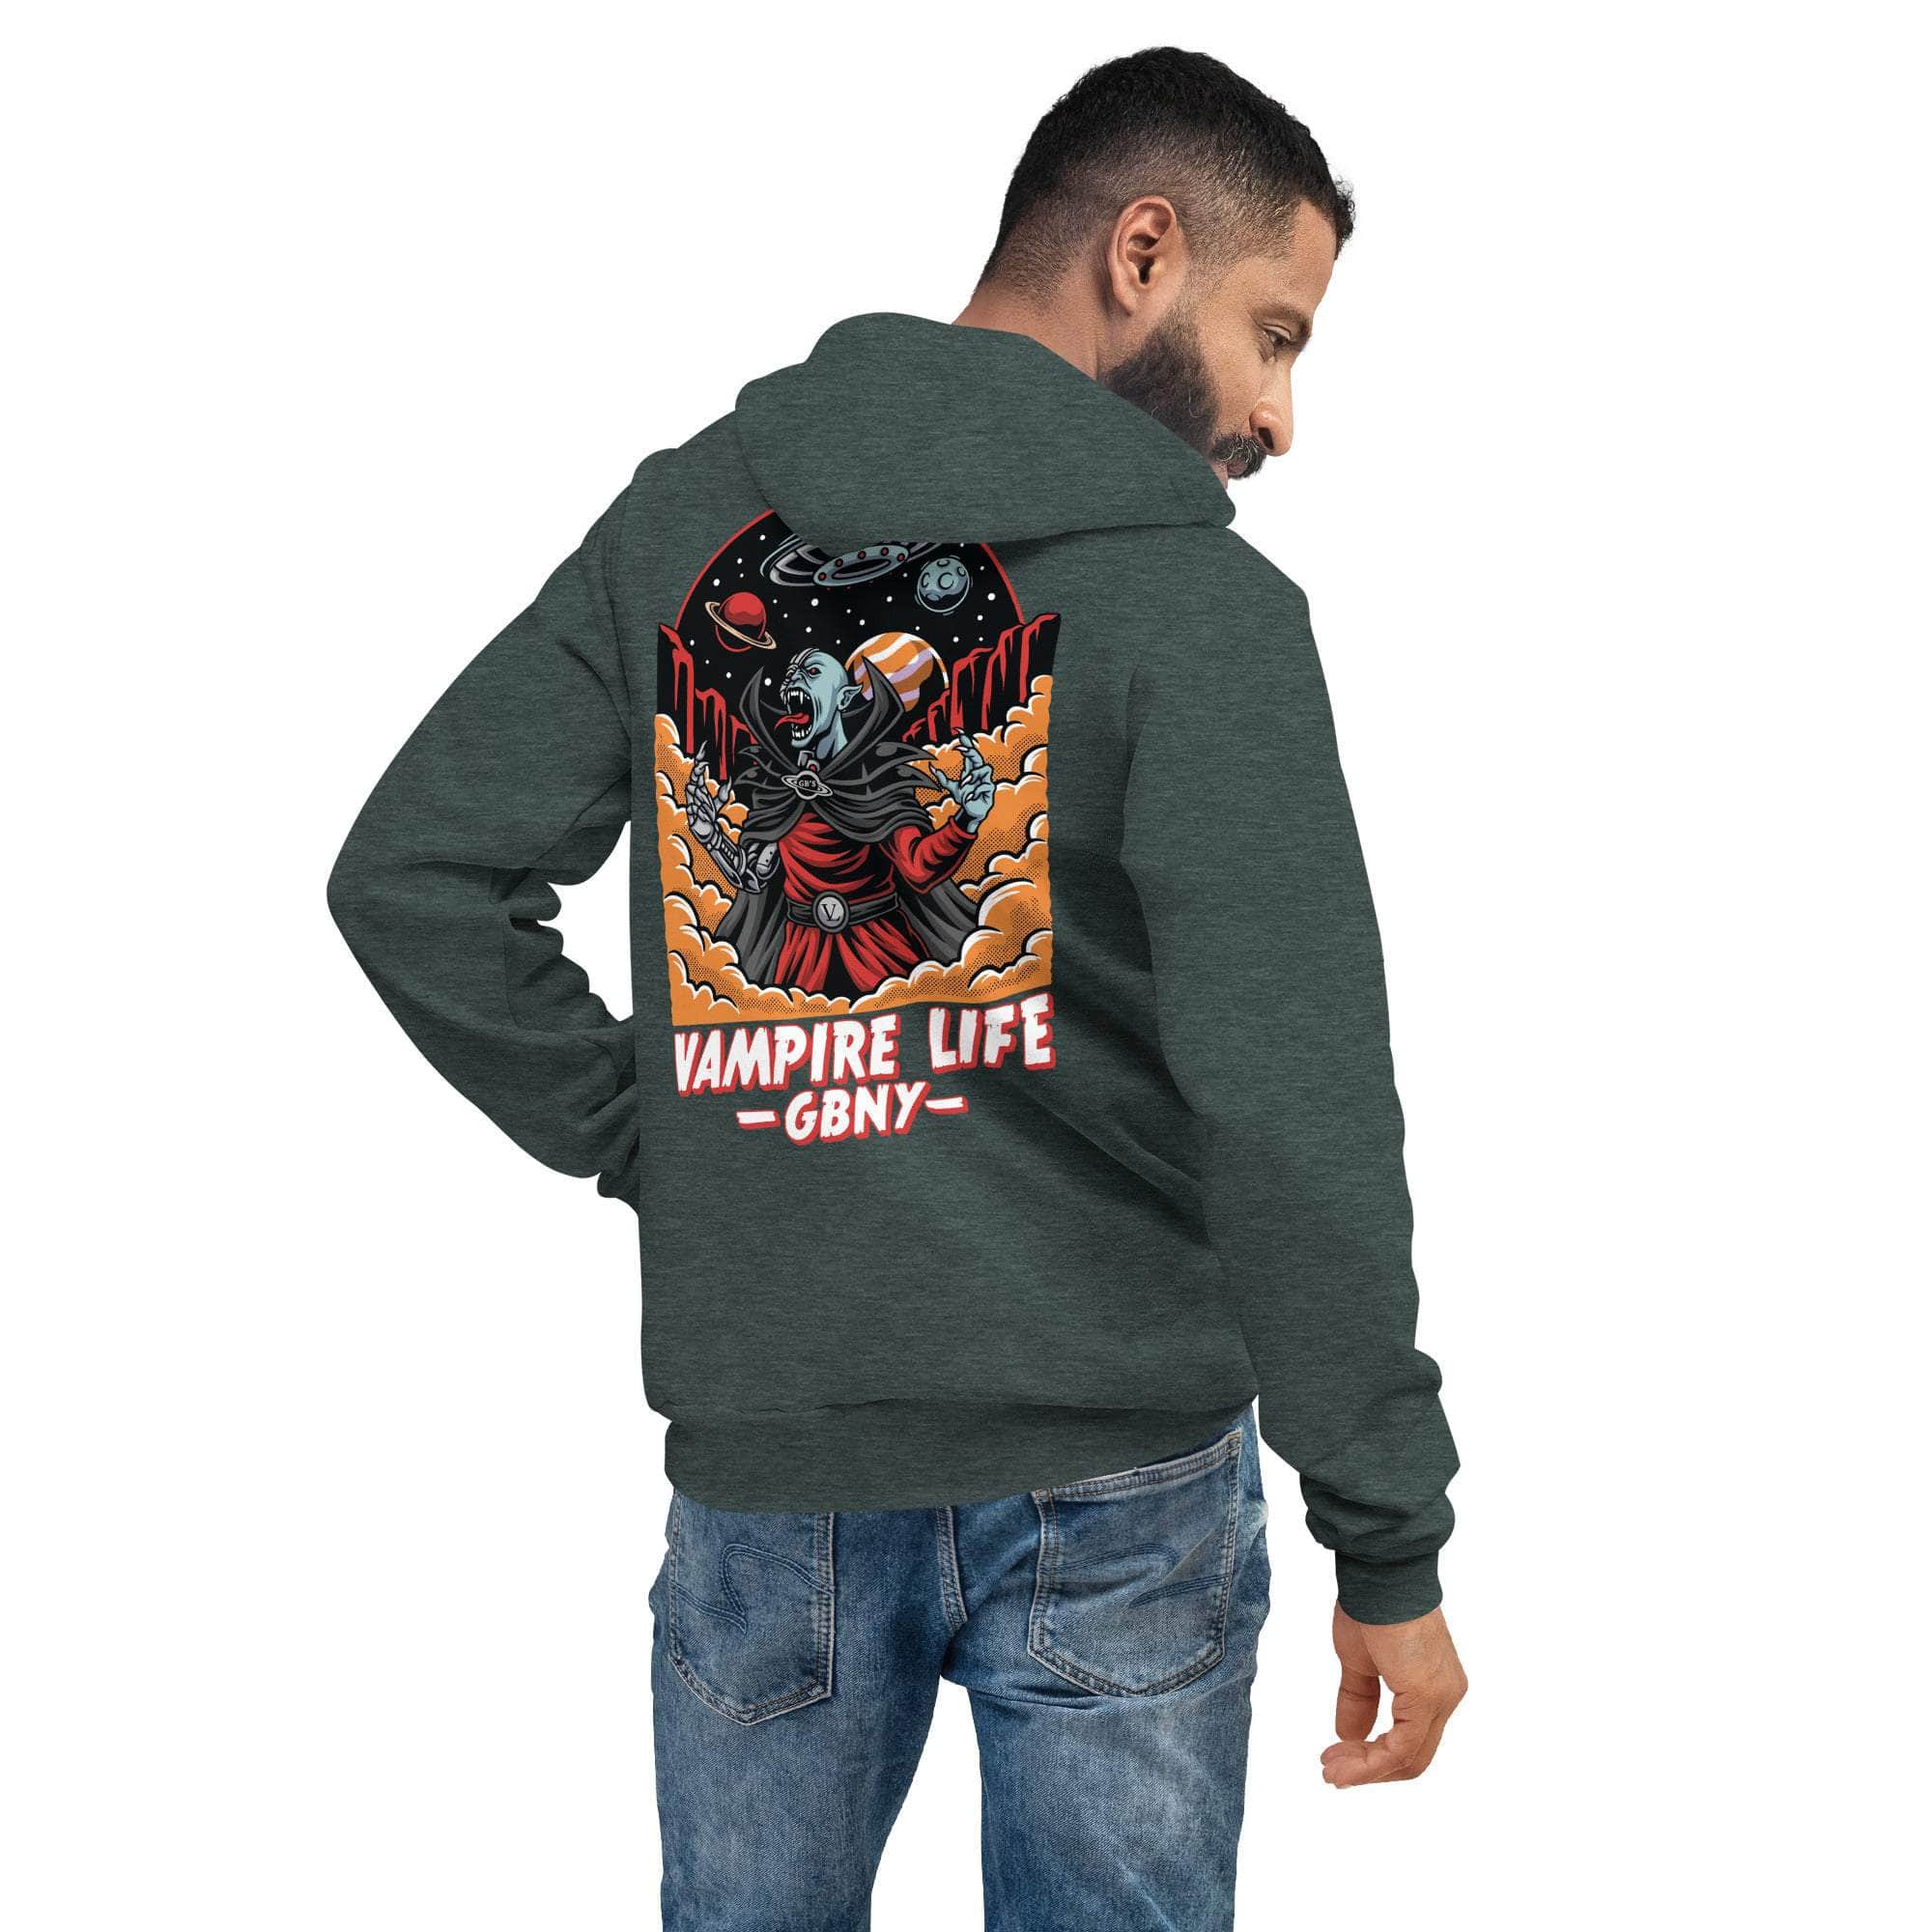 GBNY Heather Forest / S Vamp Life X GBNY "Space Vampire" Super Soft Hoodie - Men's 3307733_9245